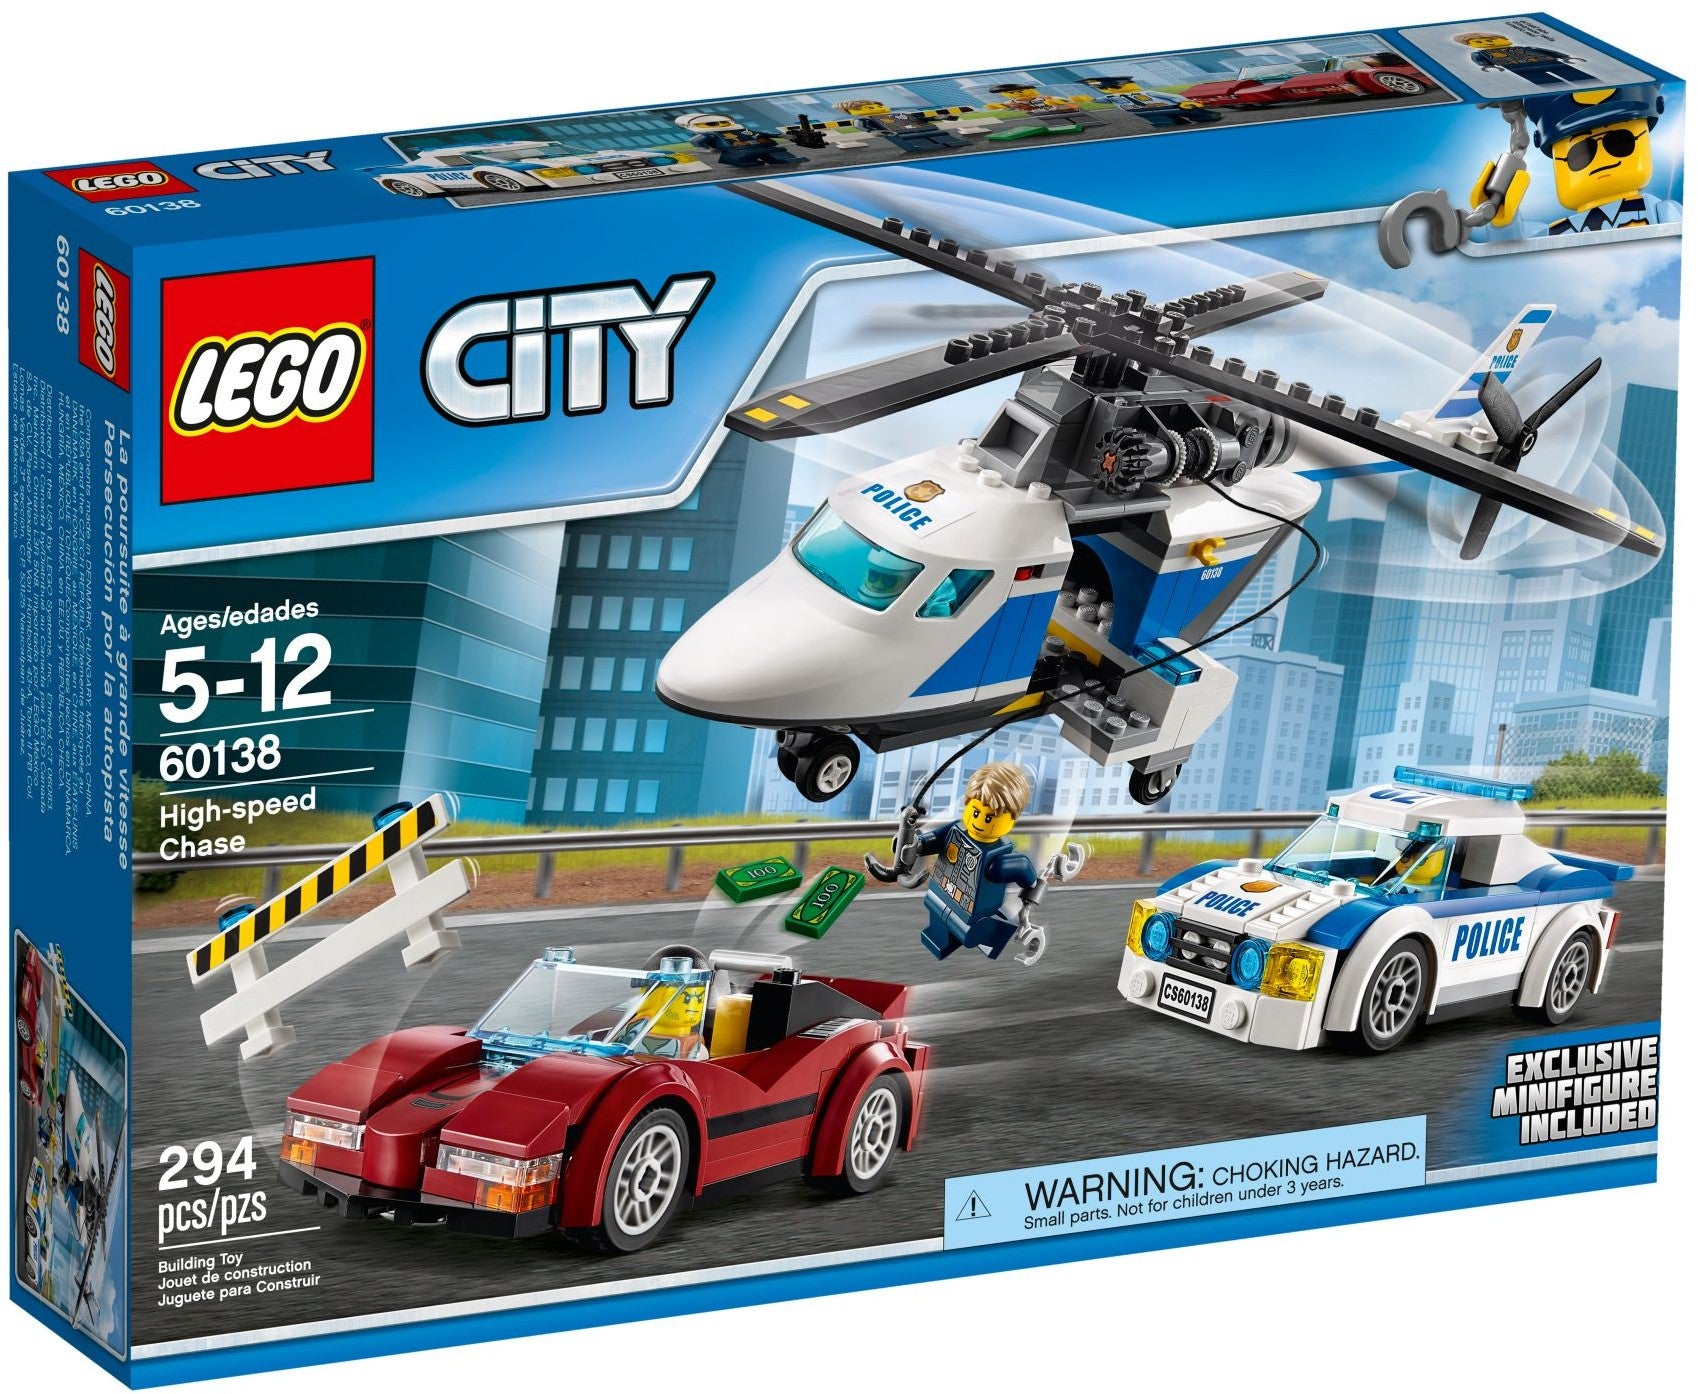 Lego City 60138 - High-speed Chase